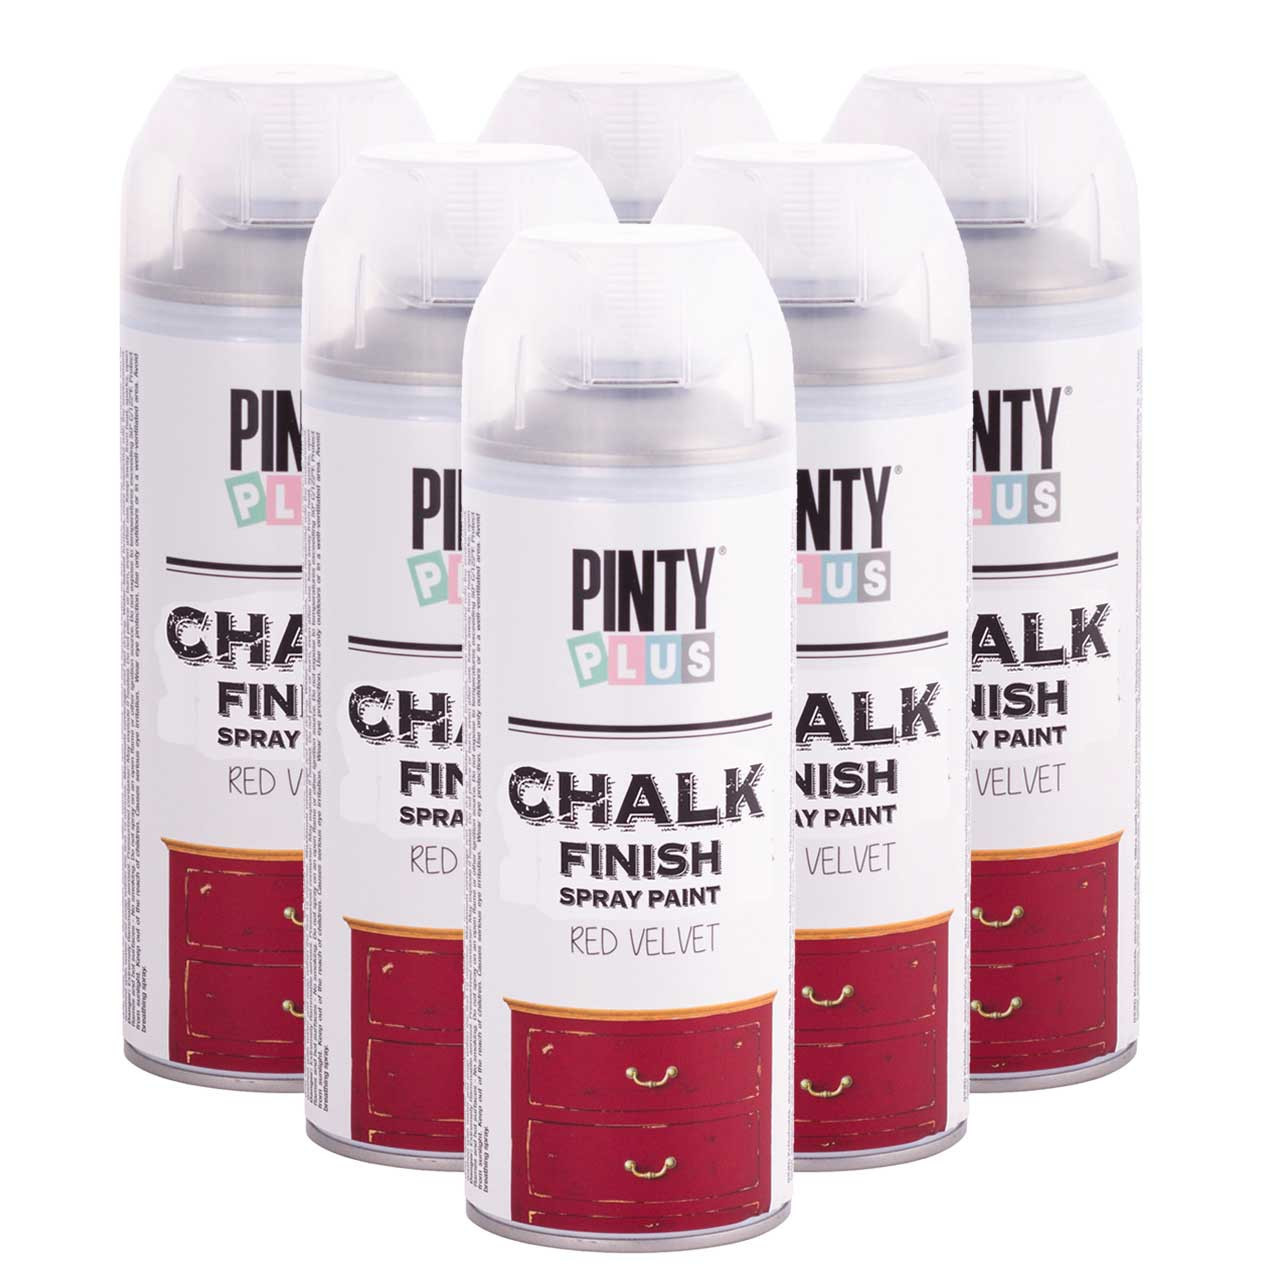 Chalk Finish Spray Paint, Pinty Plus, Case of 6 Cans - Assorted Colors -  AWarehouseFull